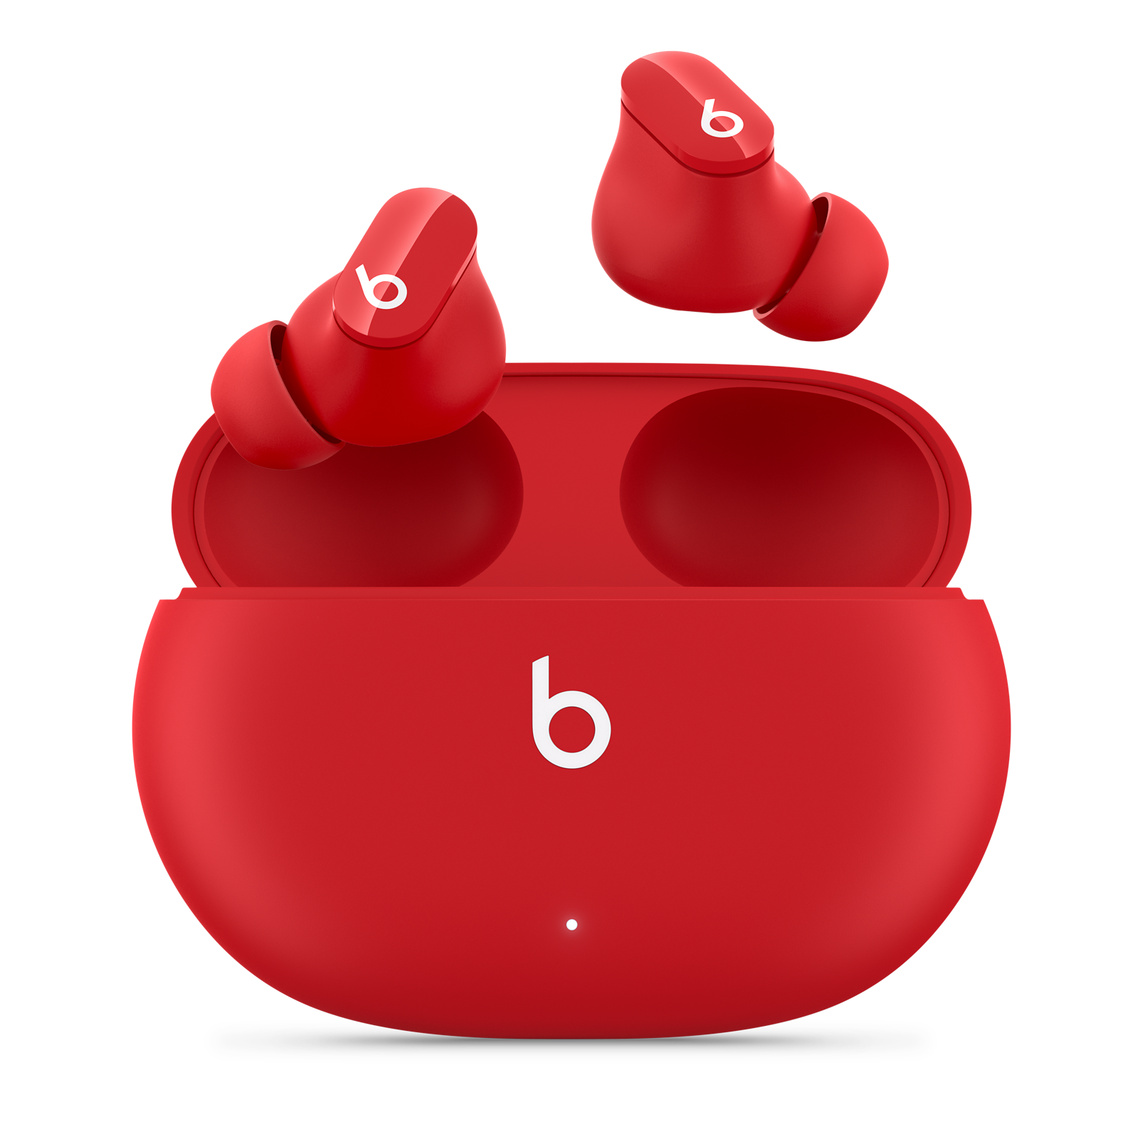 Beats Studio Buds True Wireless Noise Cancelling Earphones in Red, with the Beats logo, above convenient charging case.